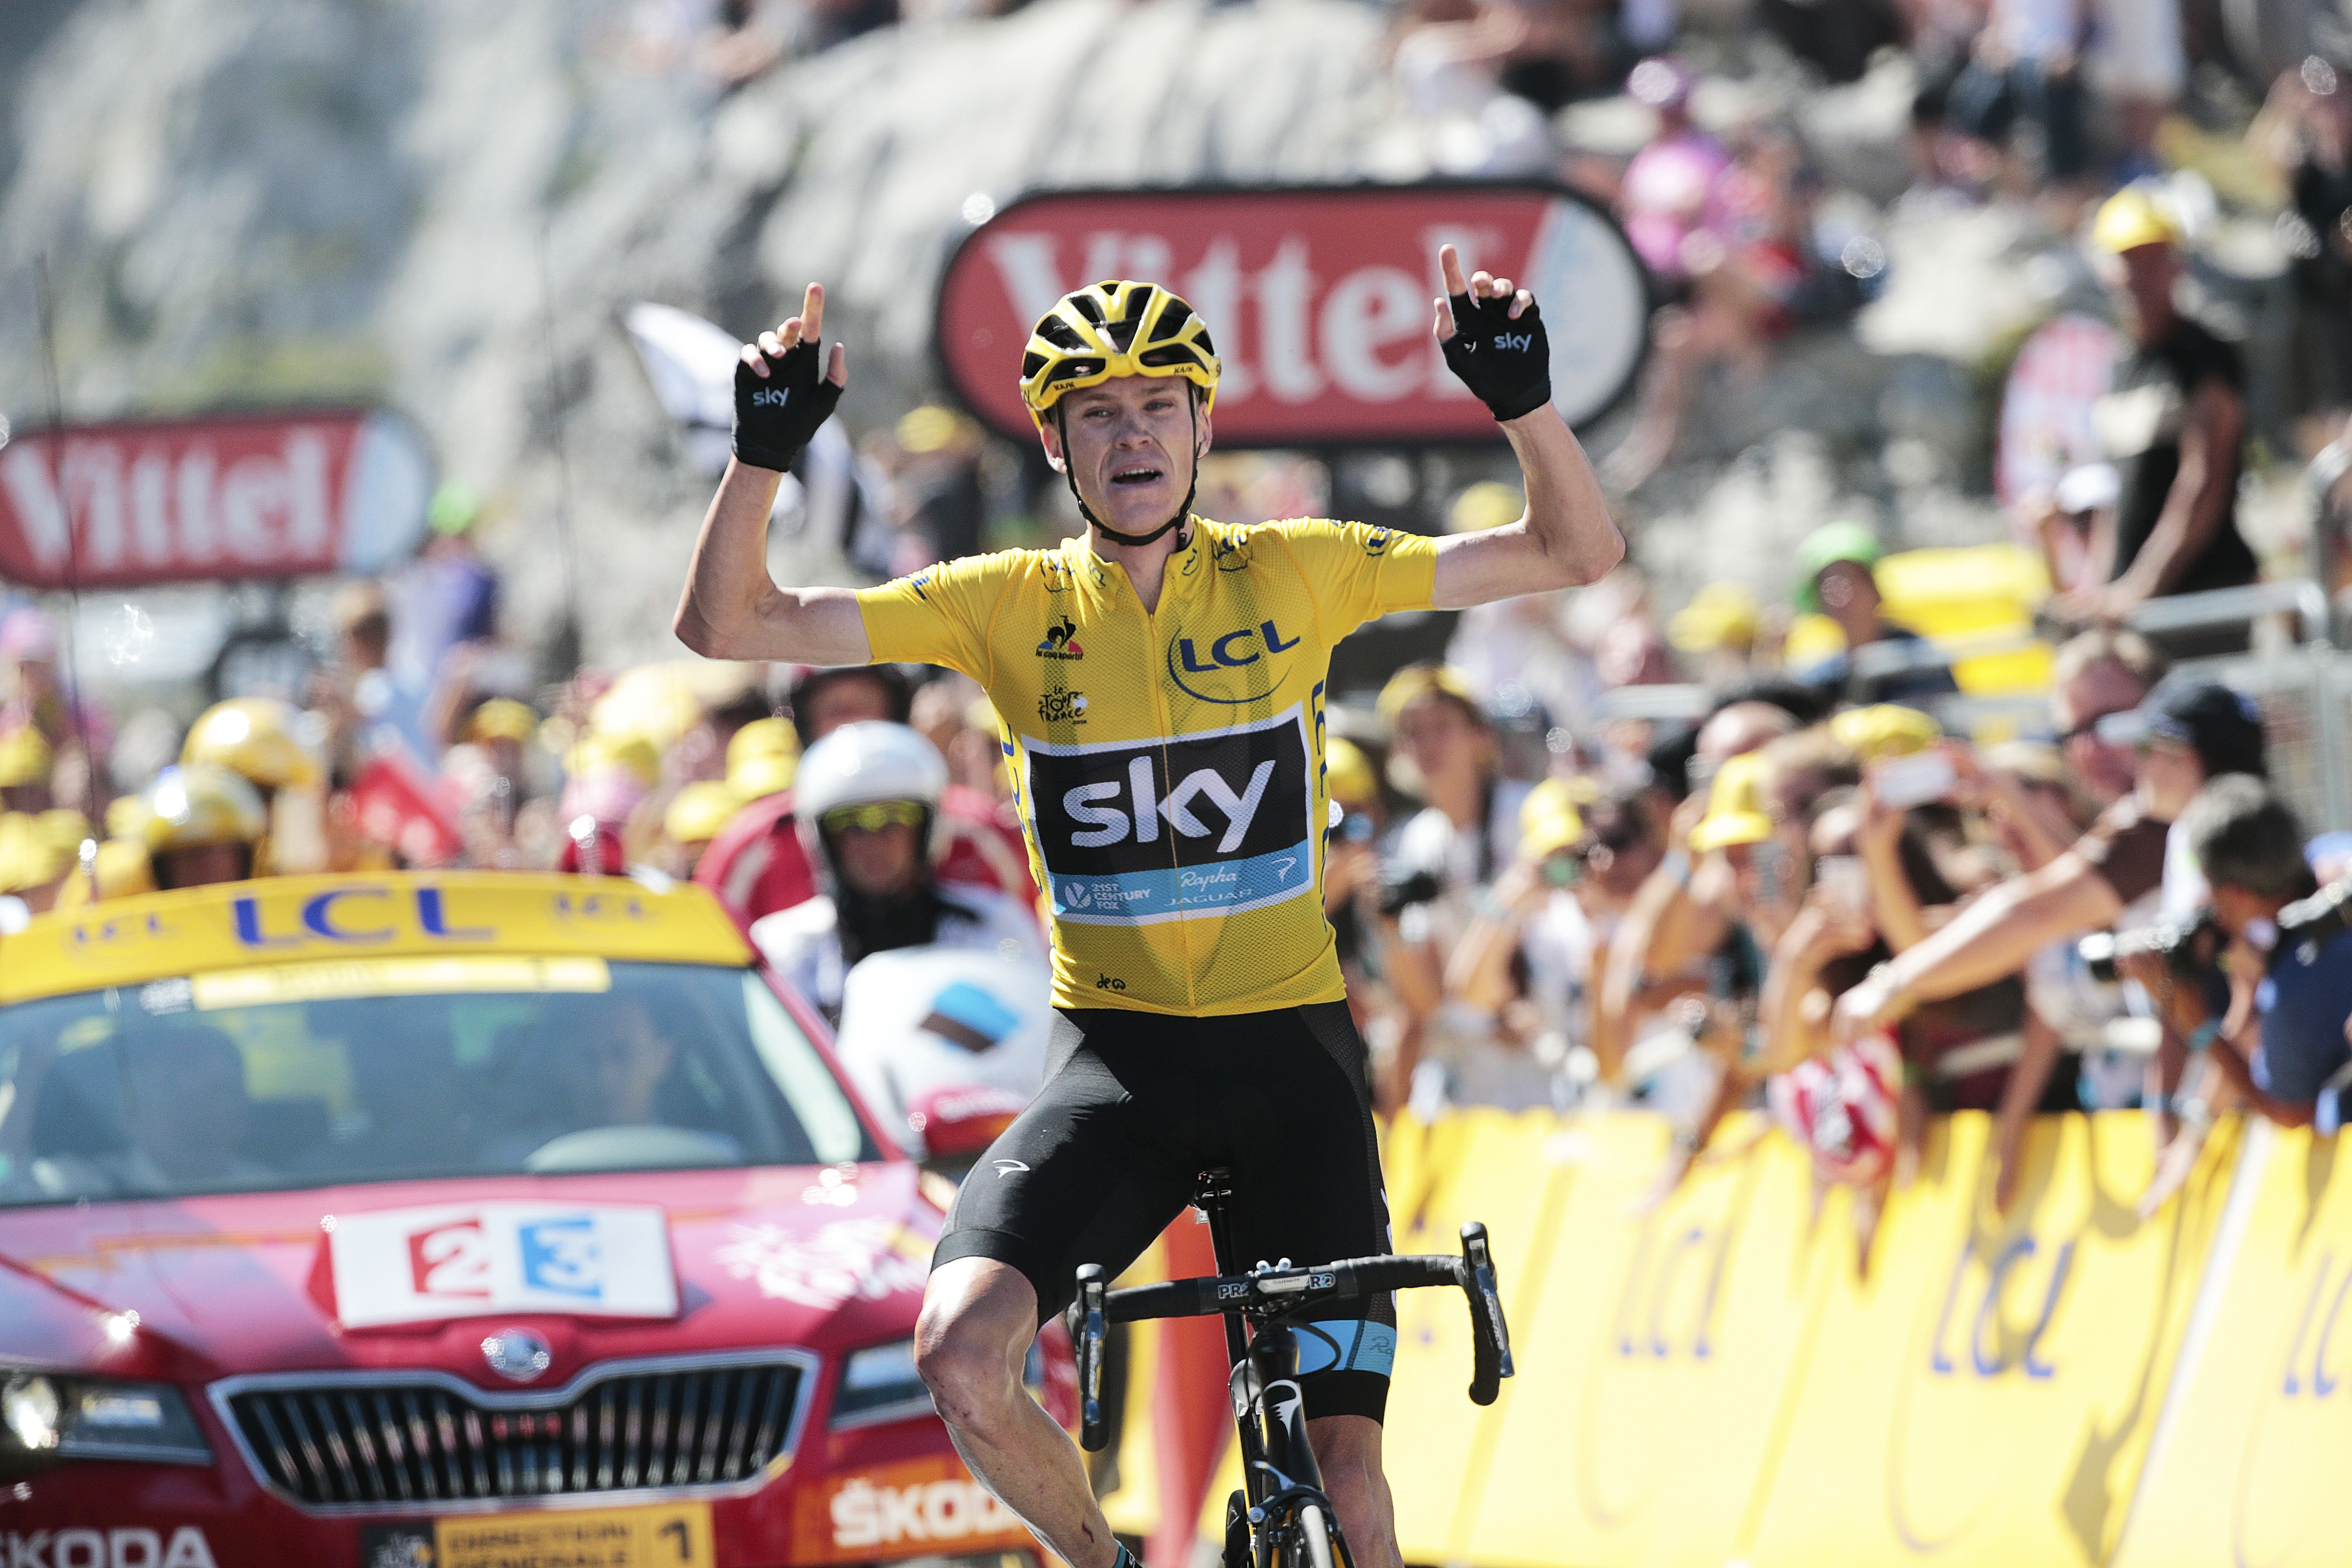 Chris Froome storms clear, after crushing the field on the first tough mountain challenge, to win the 10th stage of the Tour de France. Photo: AP